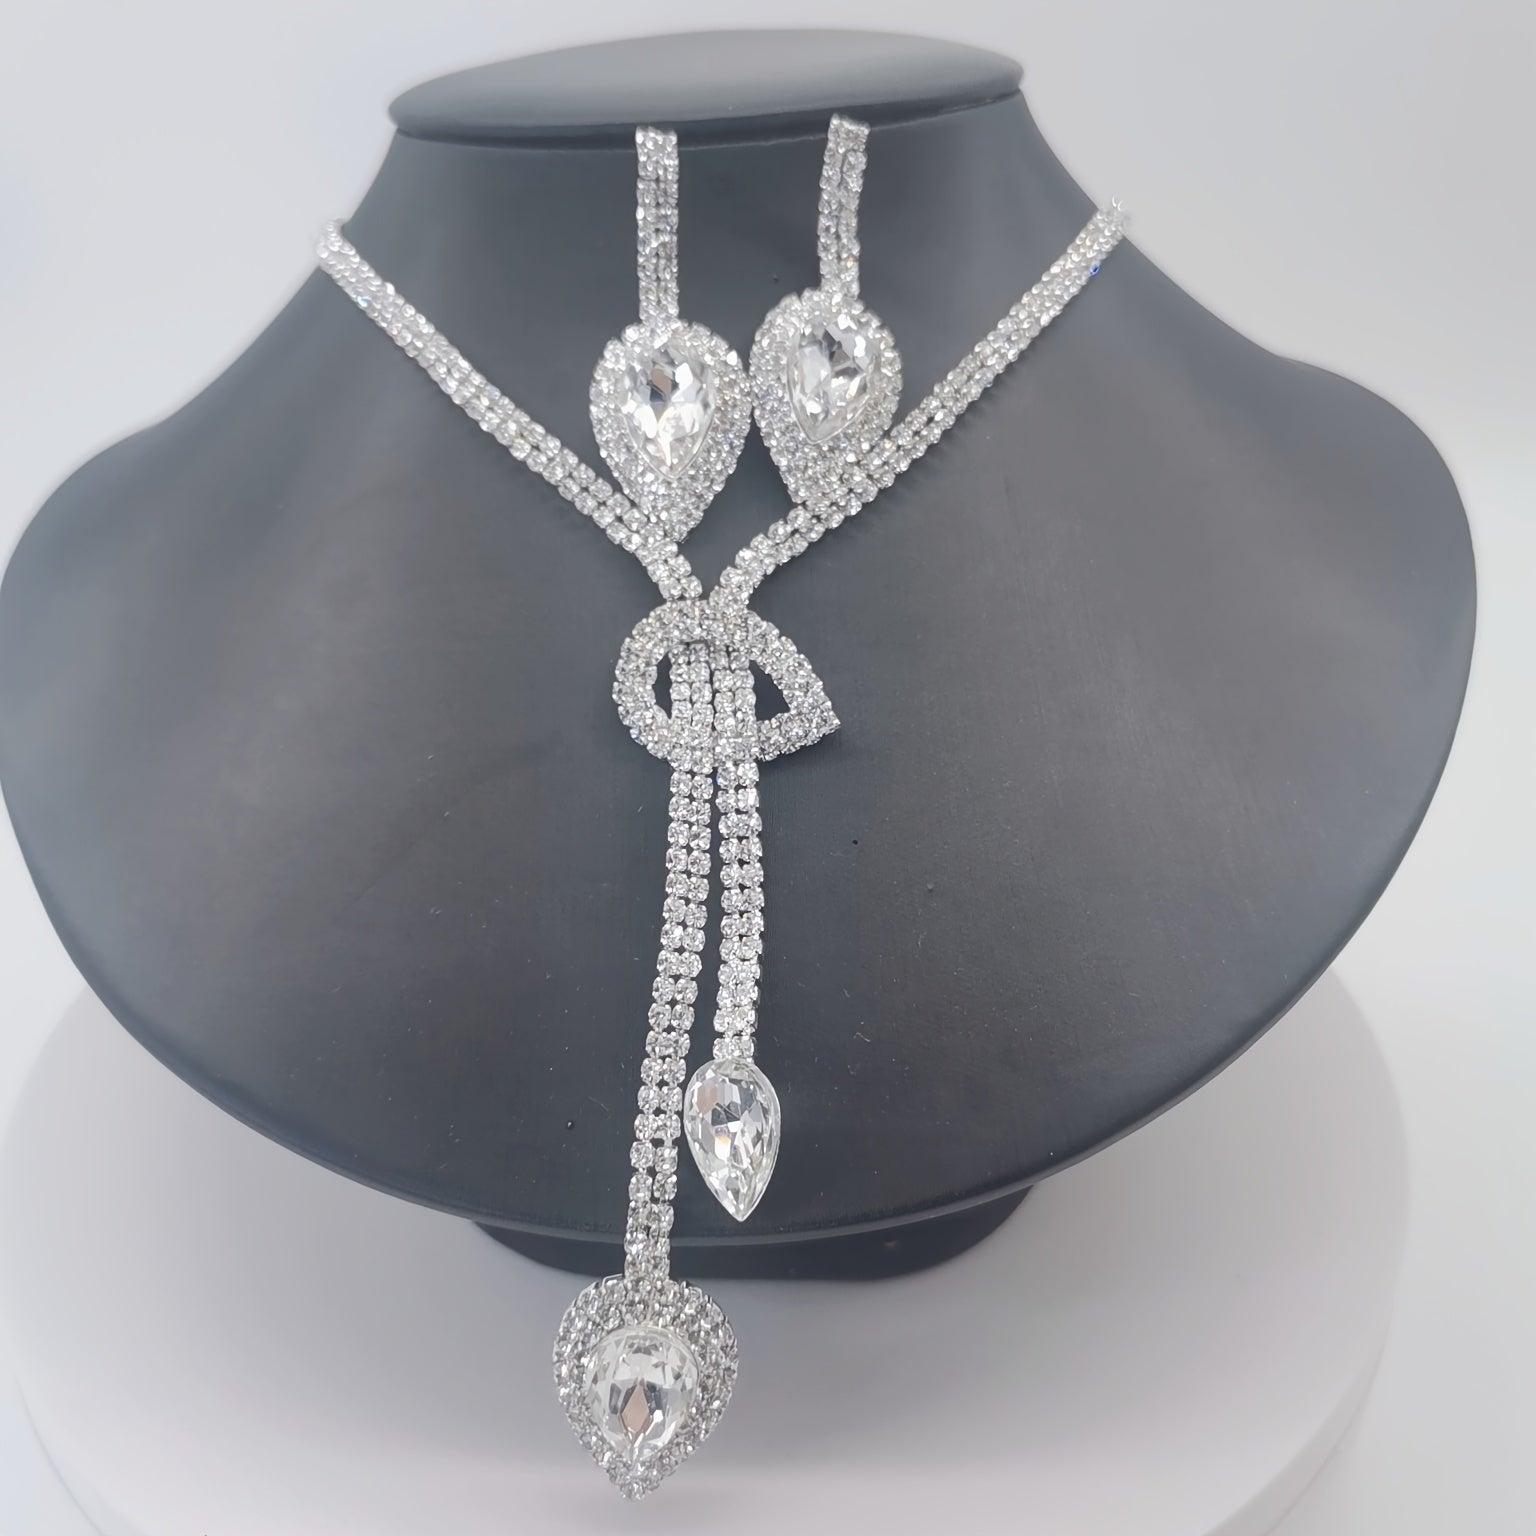 Crystal Tassel Necklace and Earrings Set - Elegant Jewelry for Women's Costume, Prom, and Dinner Parties